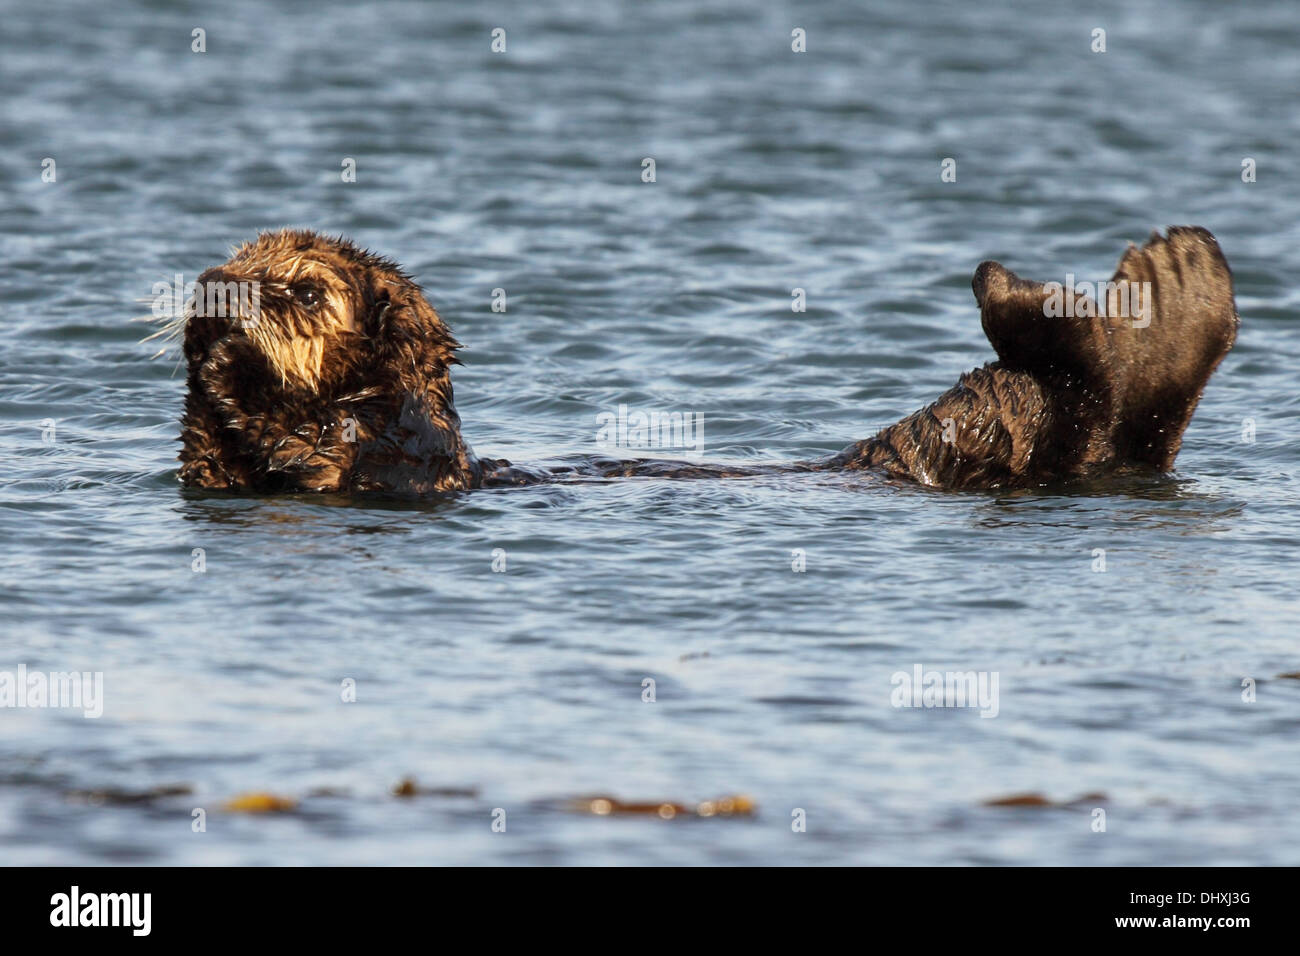 A young Sea Otter playing in the Pacific Ocean. Stock Photo